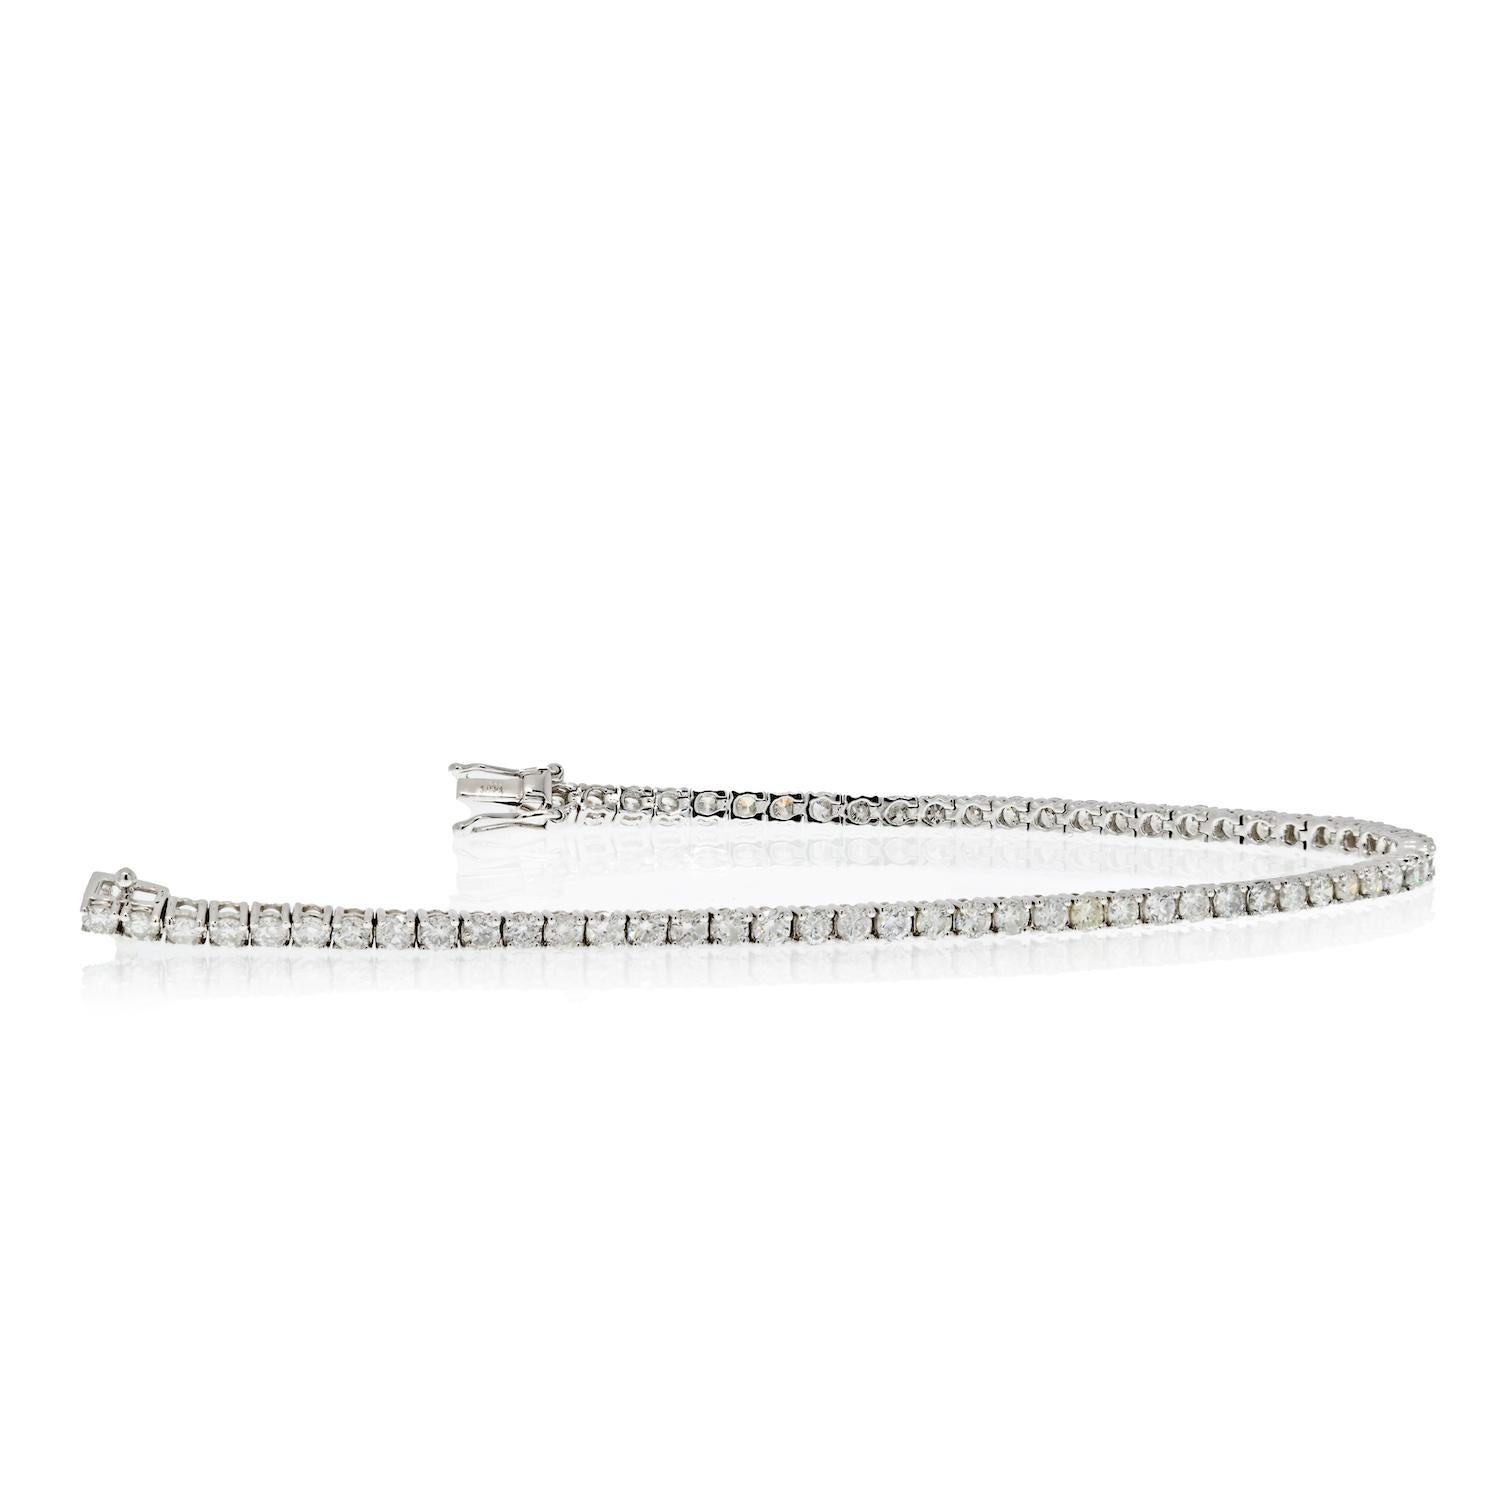 Delicate, beautiful, and elegant natural Diamond box chain tennis bracelet. All of the stones are mounted on four prongs and are ideal brilliant-cut for optimal sparkle and shine. Bracelets have metal purity and diamond carat stamped/engraved on the